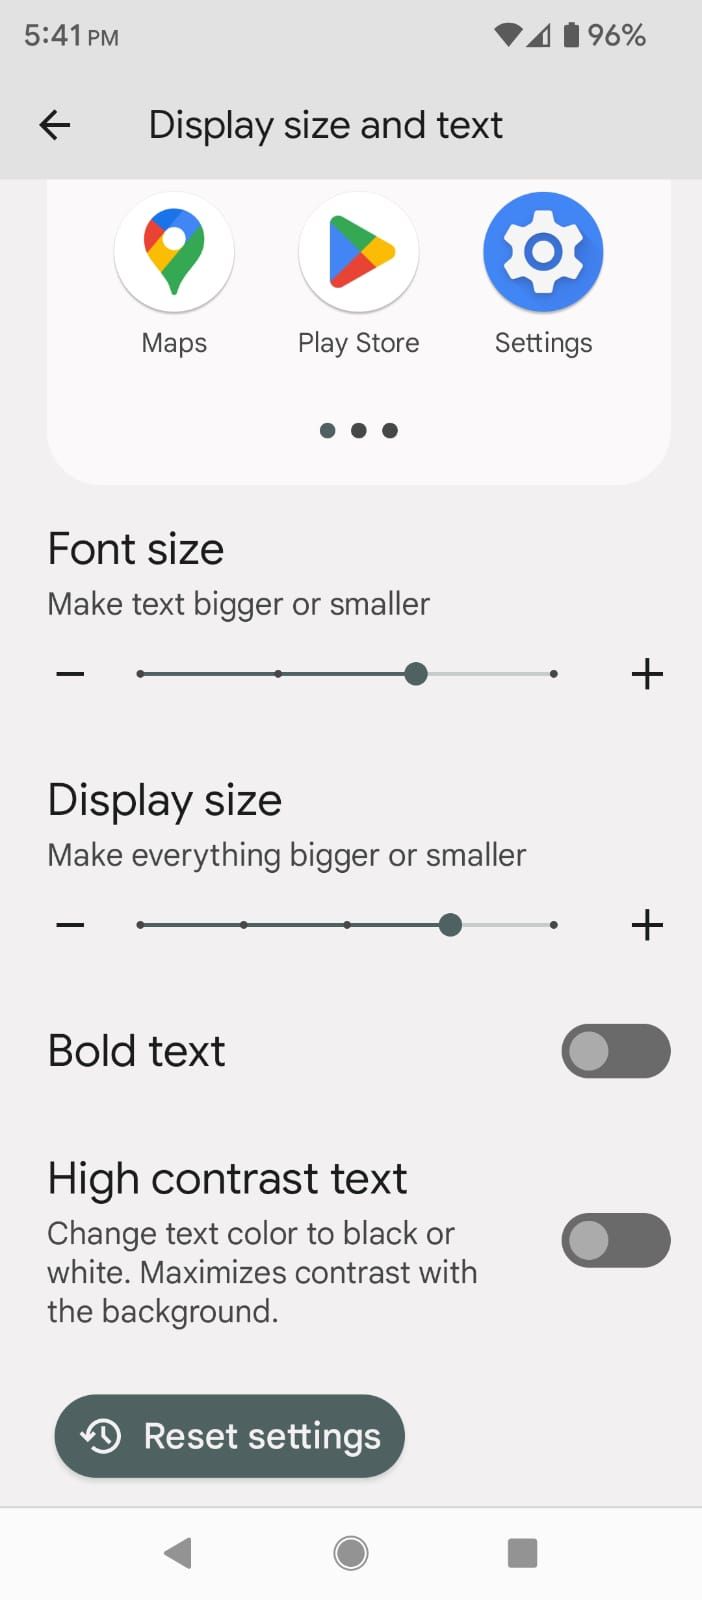 Adjusting the display size in Android Display Settings